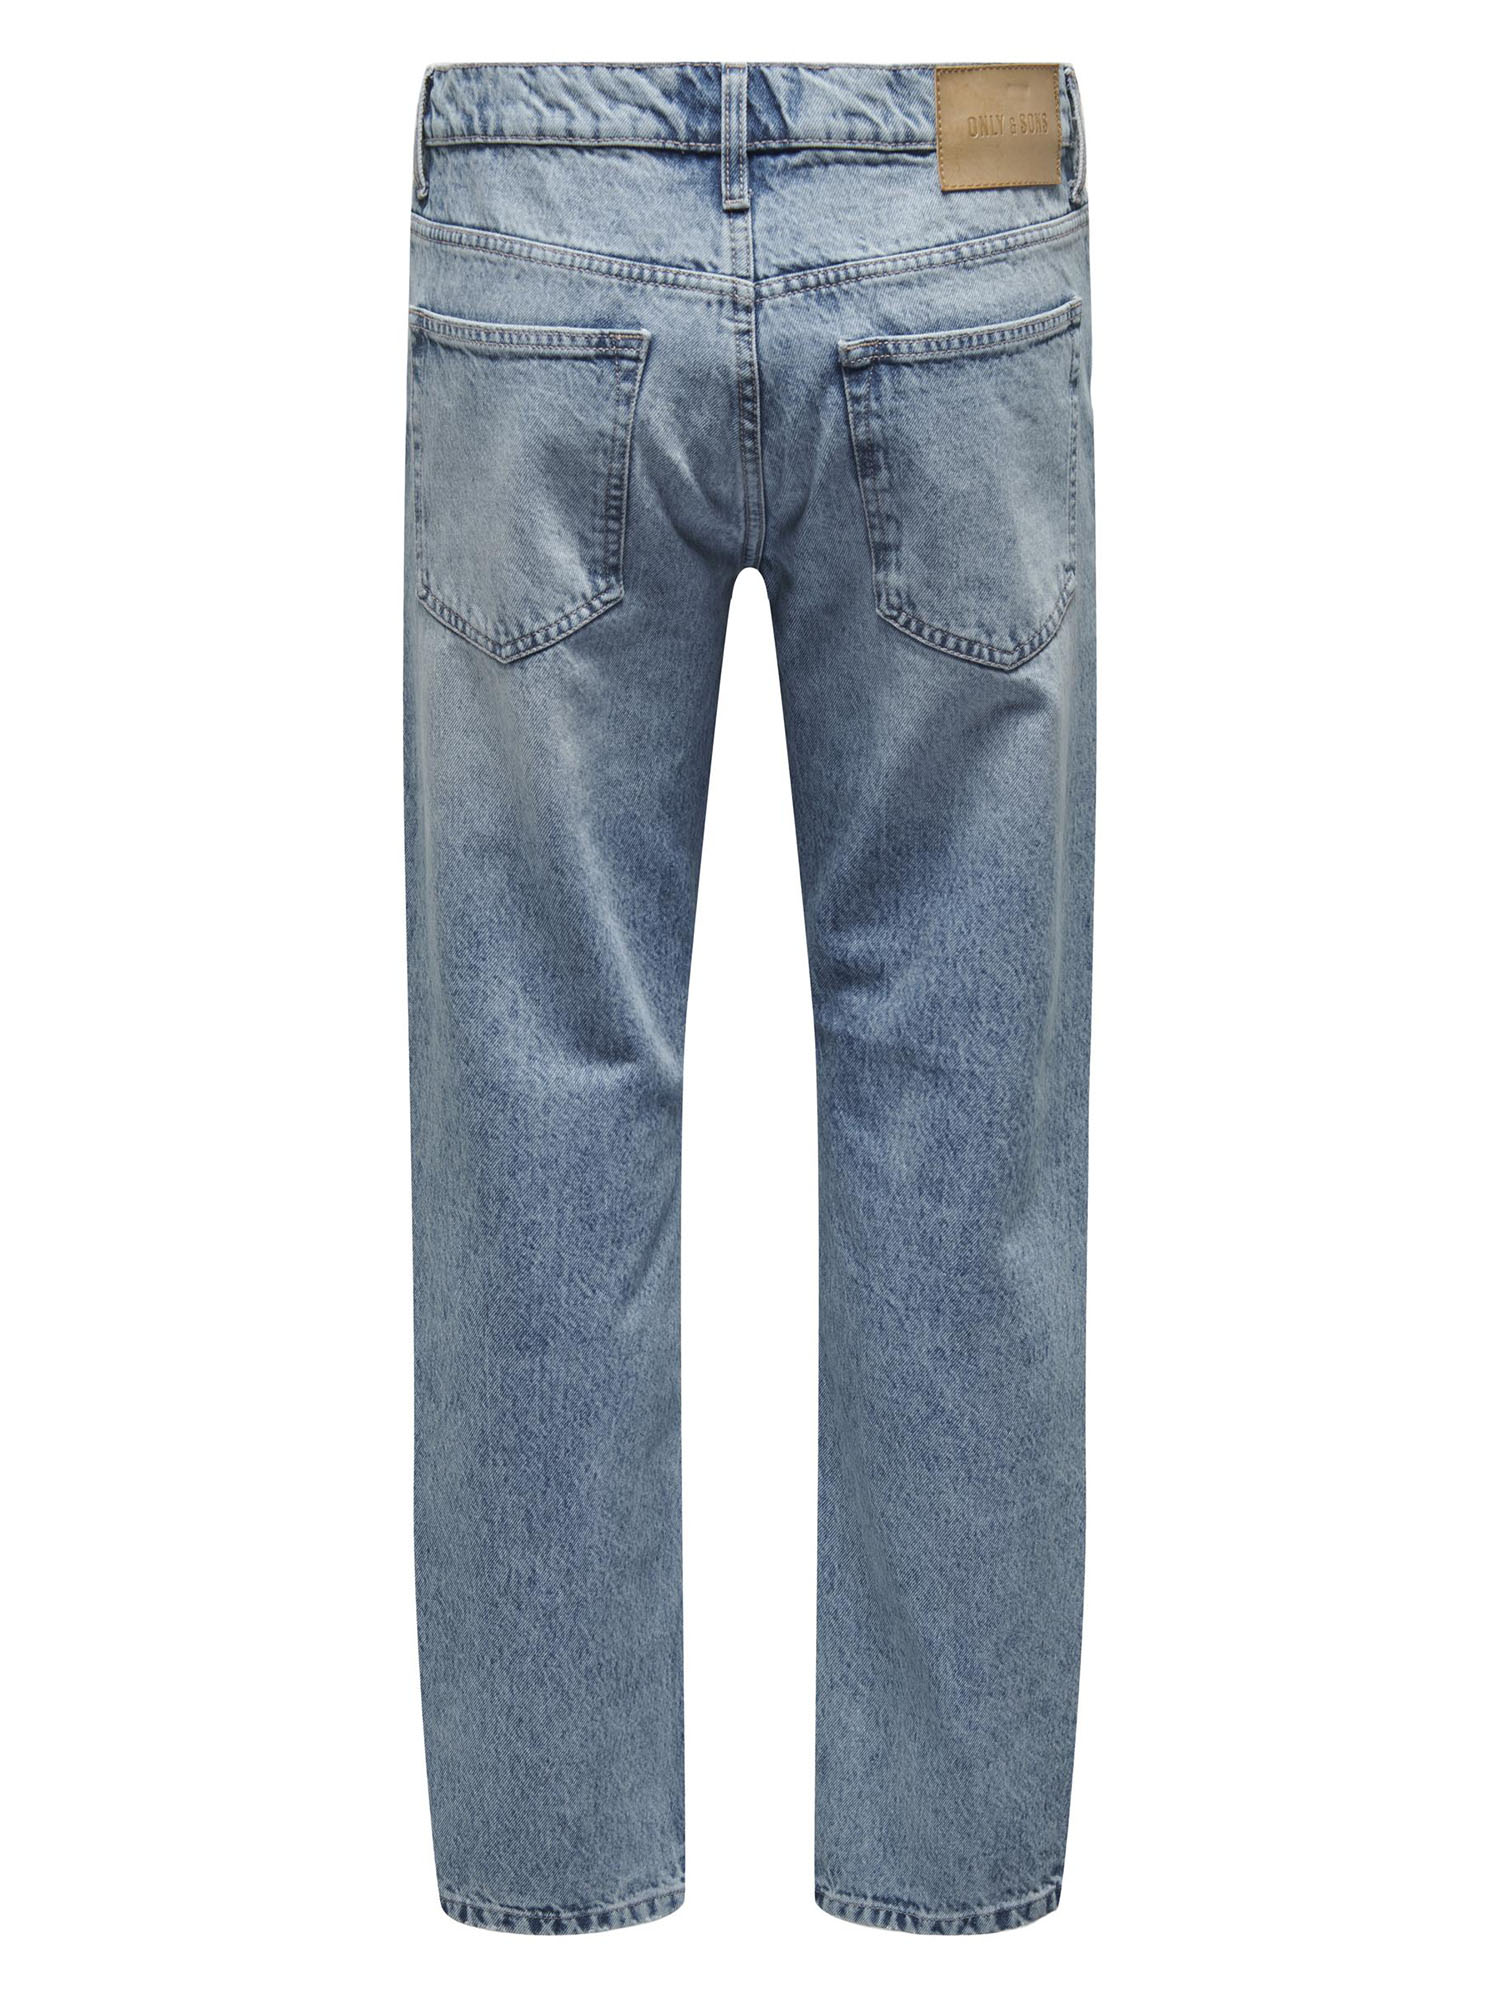 ONLY&SONS EDGE - JEANS CHIARO